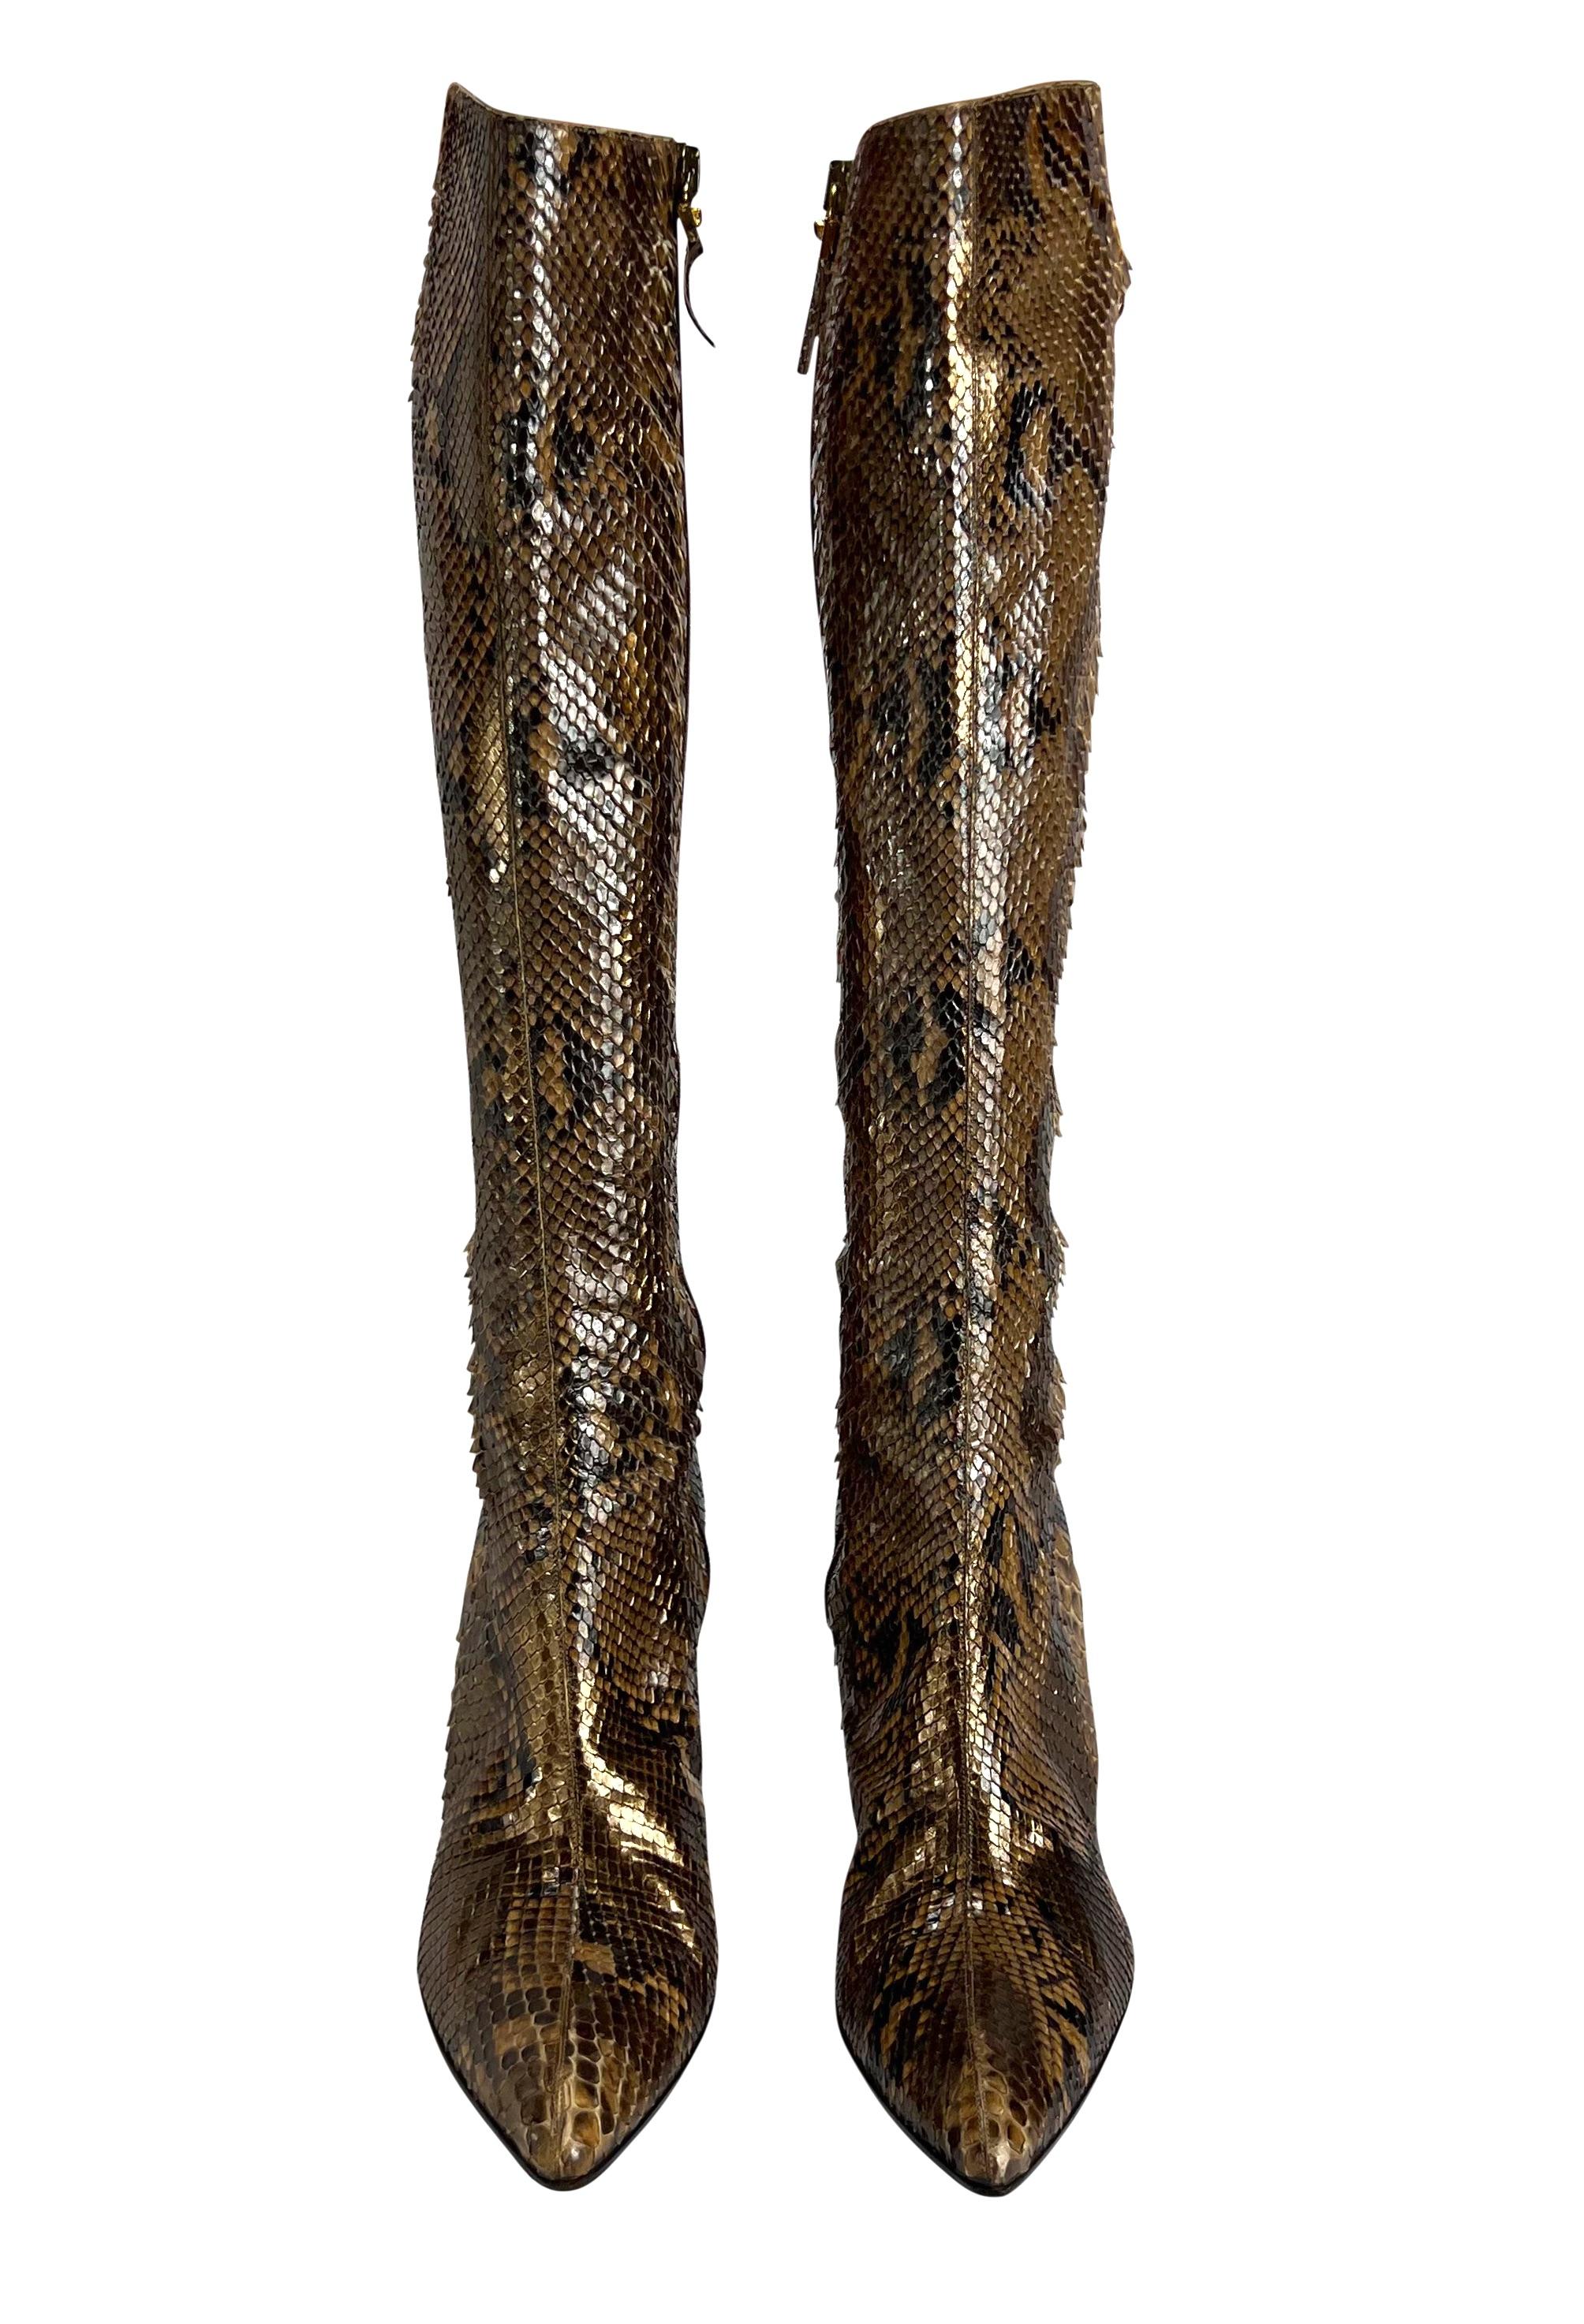 F/W 1999 Gianni Versace by Donatella Metallic Python Heel Boots Size 37 For Sale 2